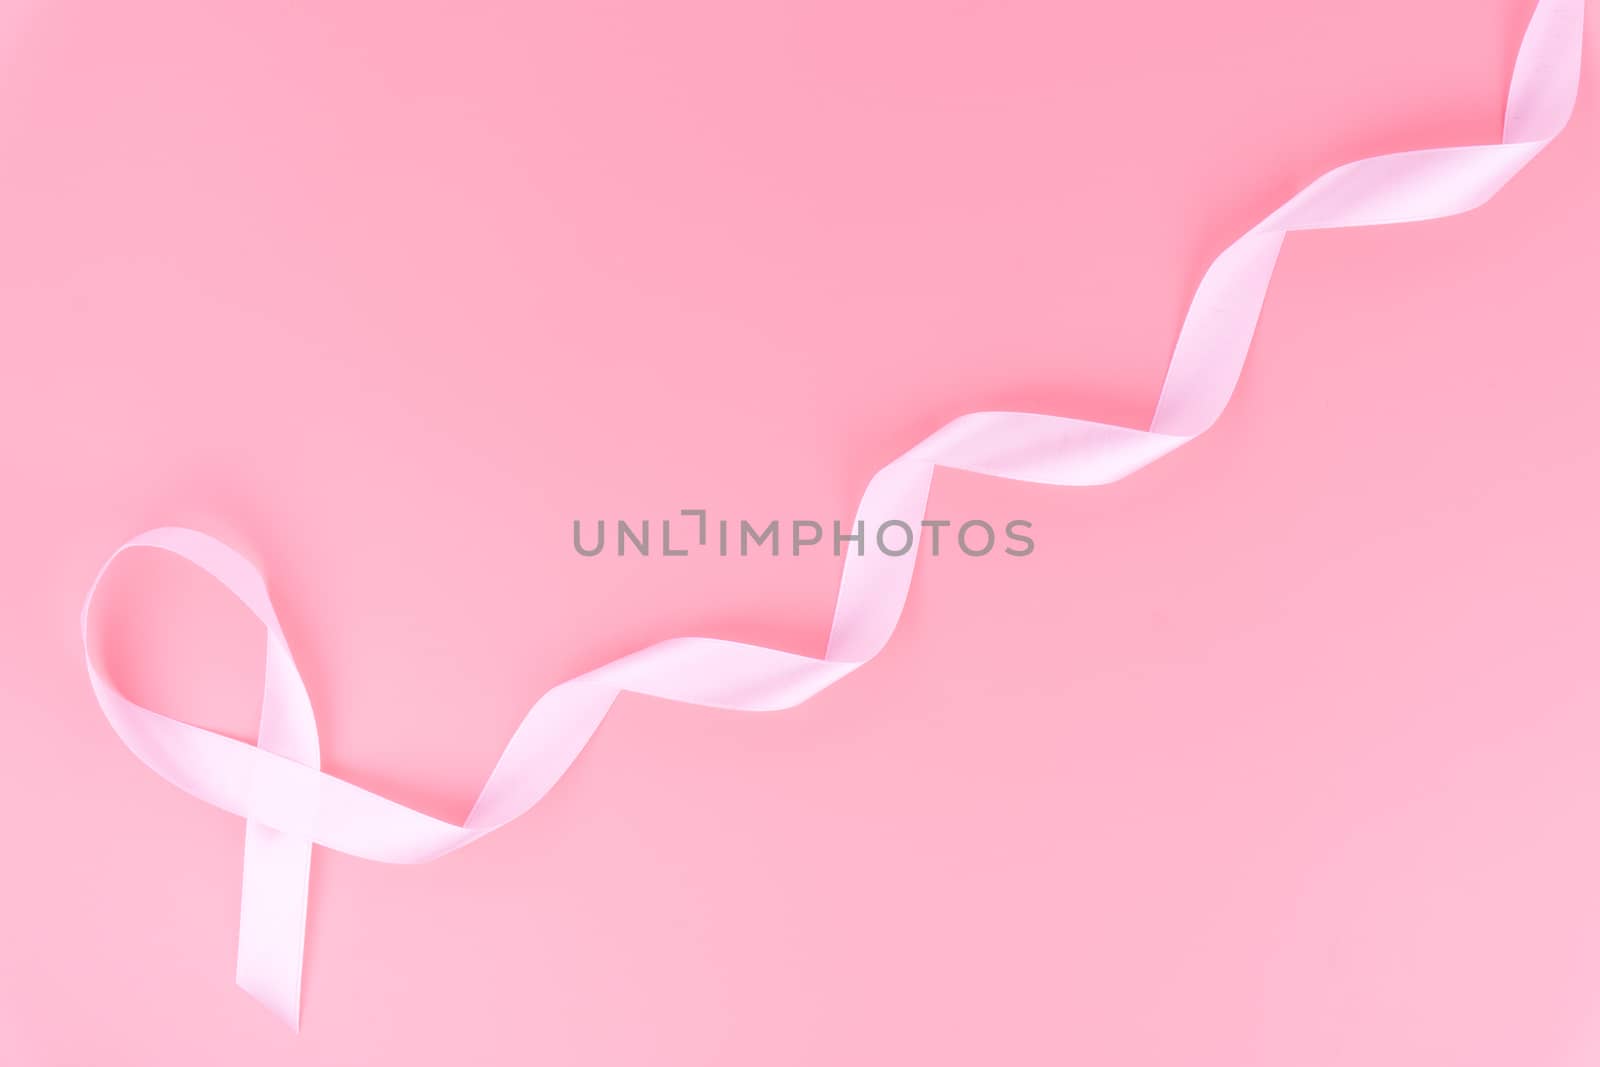 Pink ribbon breast cancer on pink background with copy space for text. Flat lay, top view.